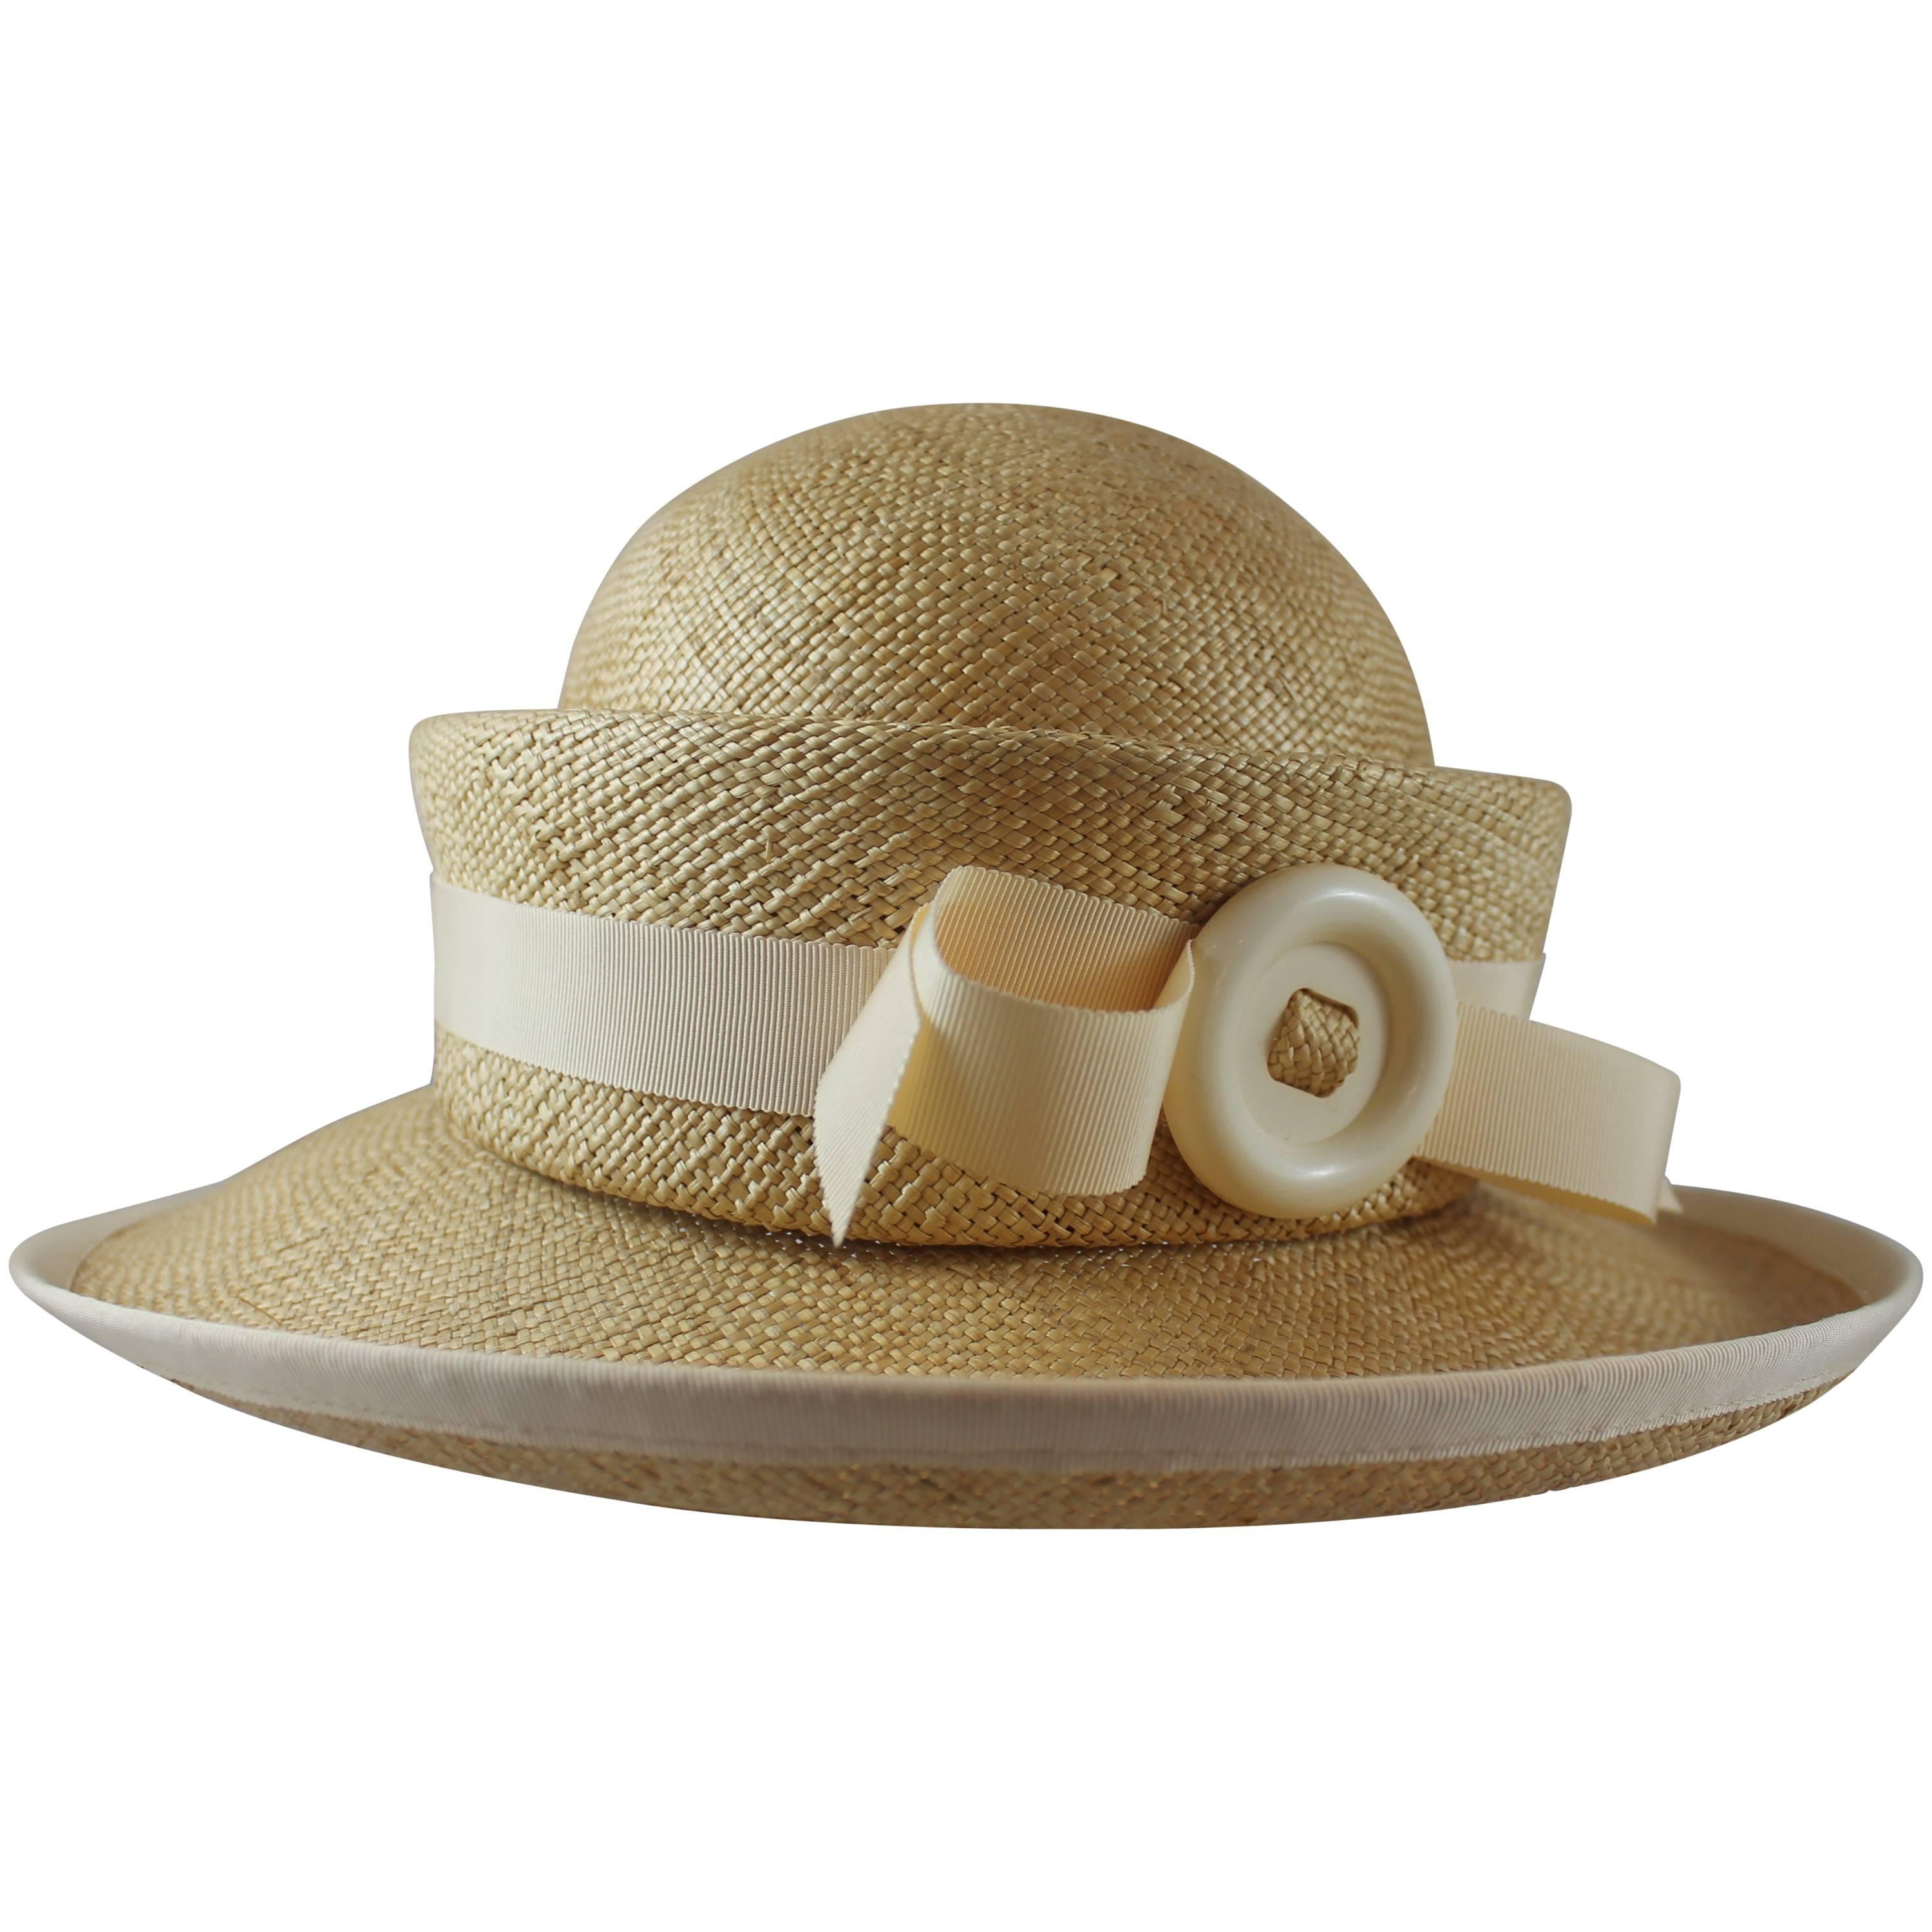 Suzanne Couture Millinery Tan Straw Hat with Ivory Ribbon Trim & Bow  For Sale